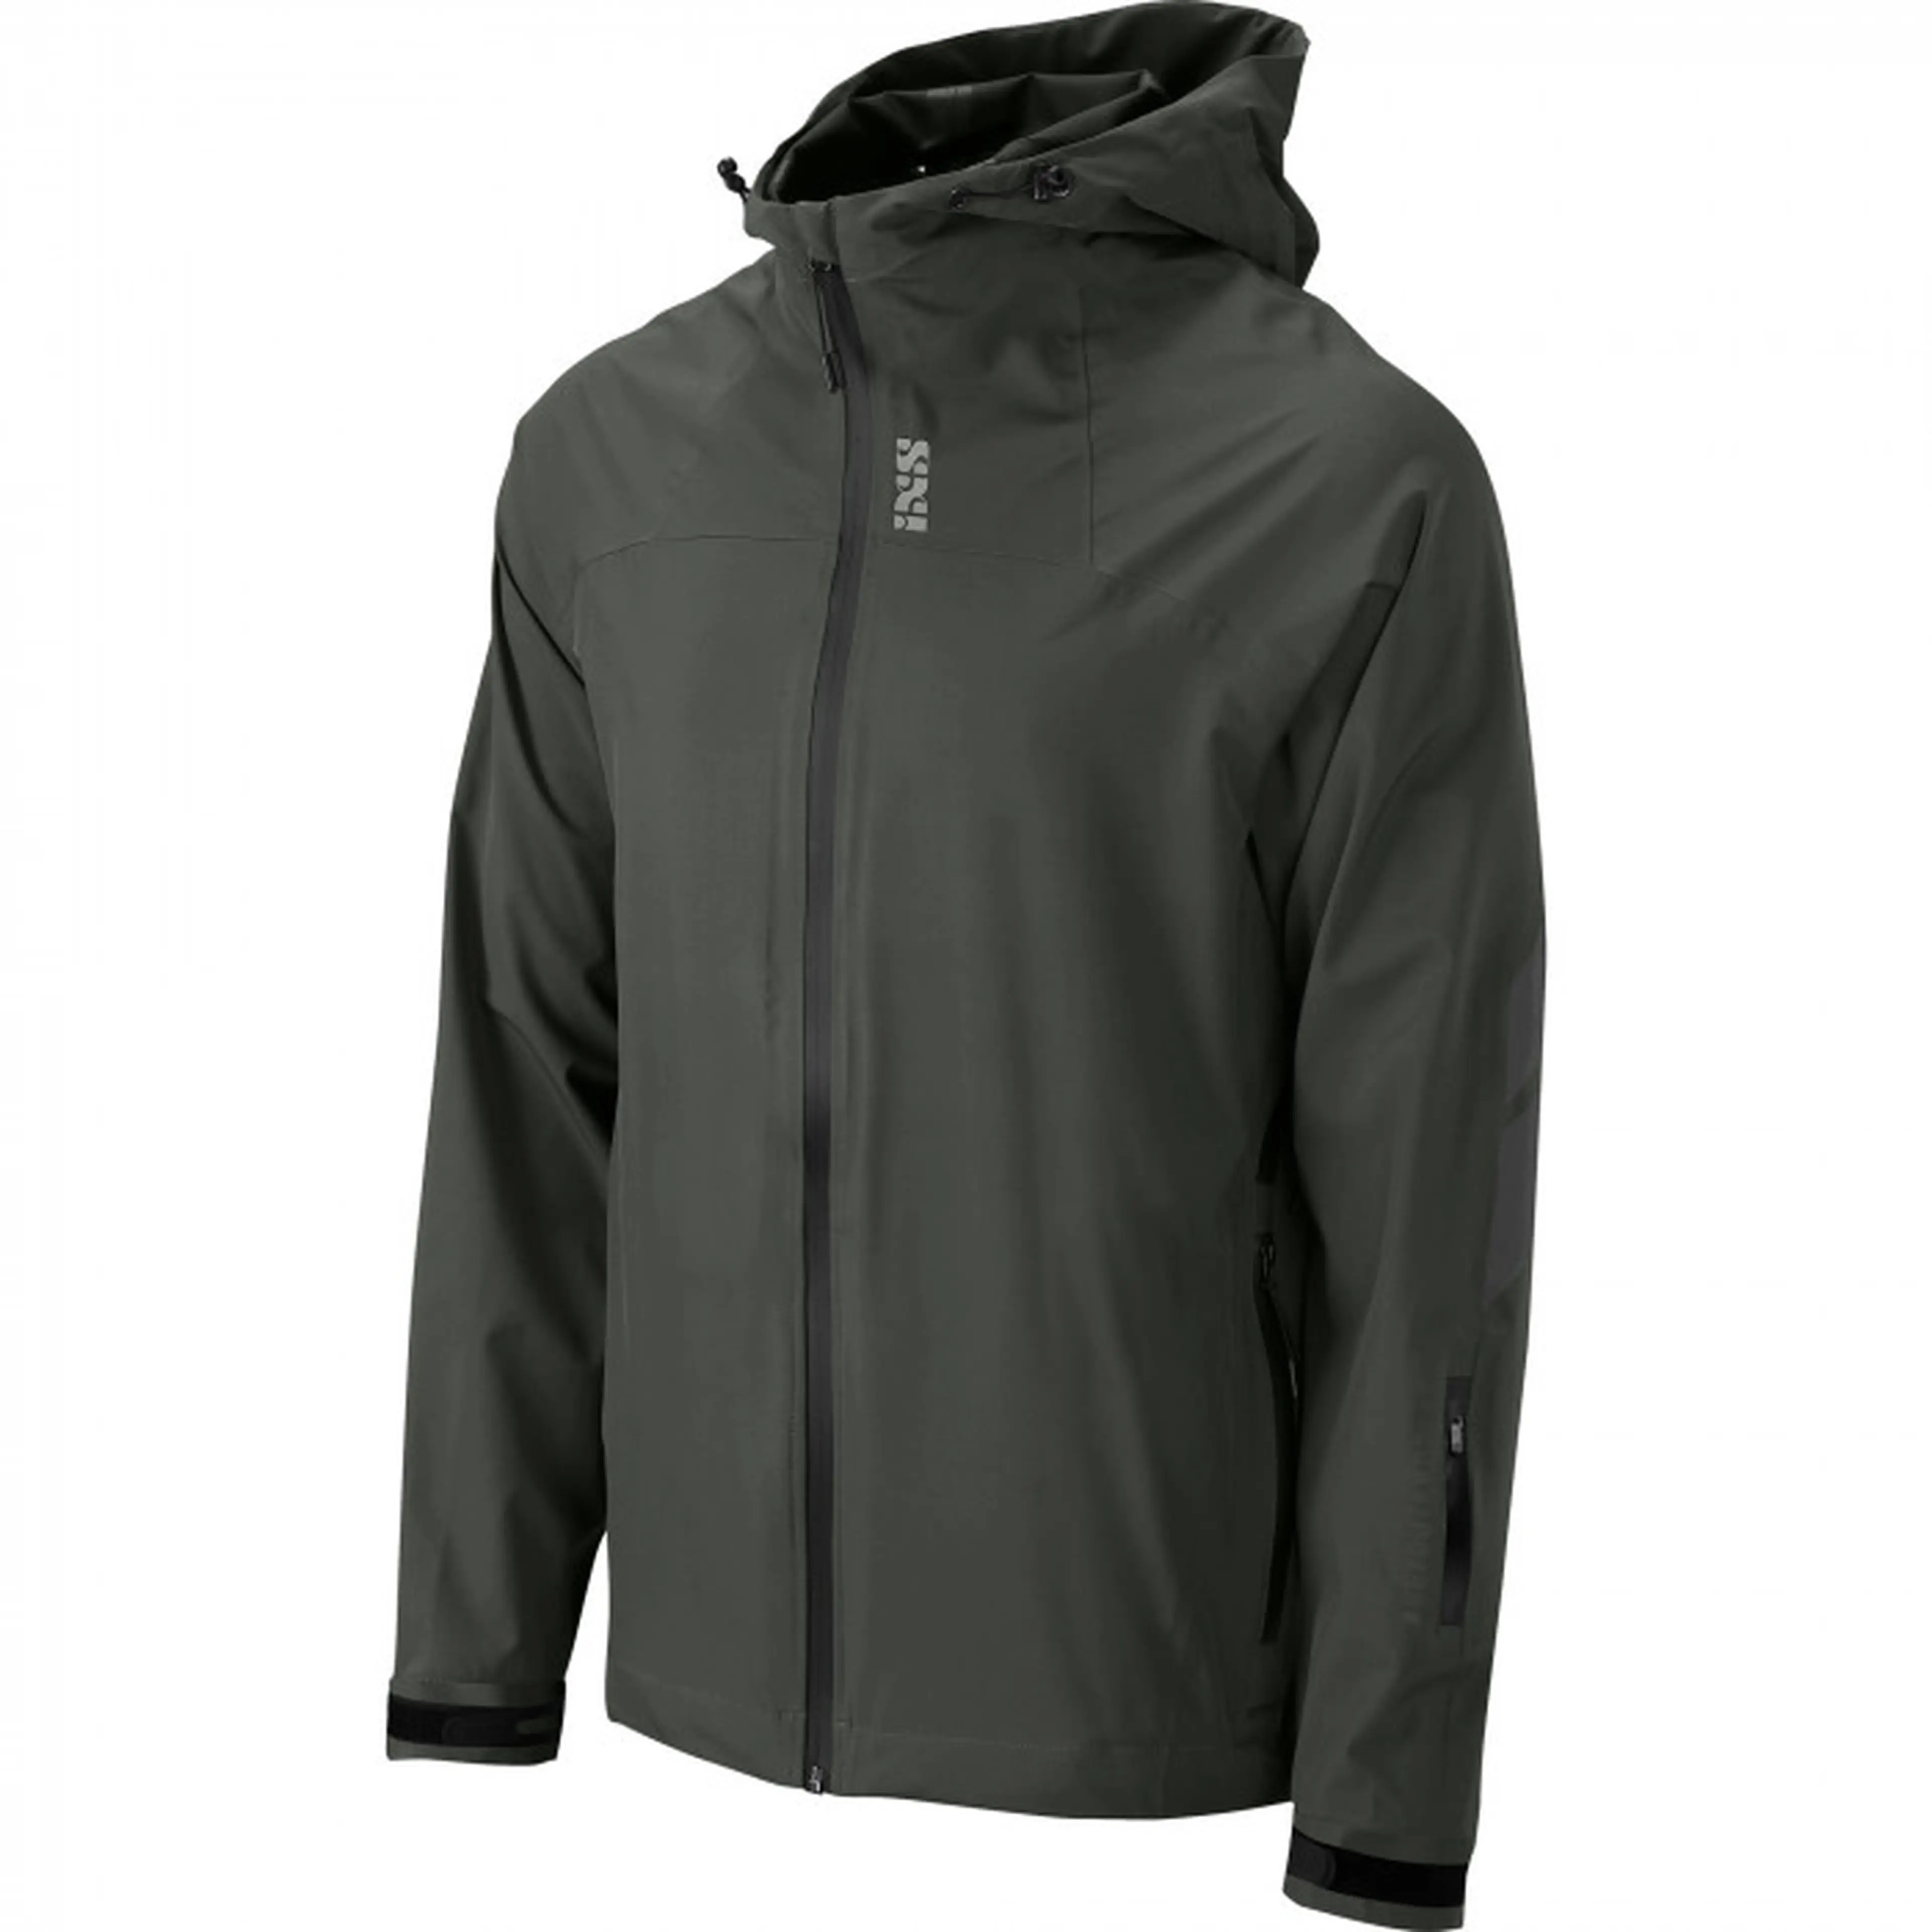 1. IXS CARVE AW JACKET ANTHRACITE